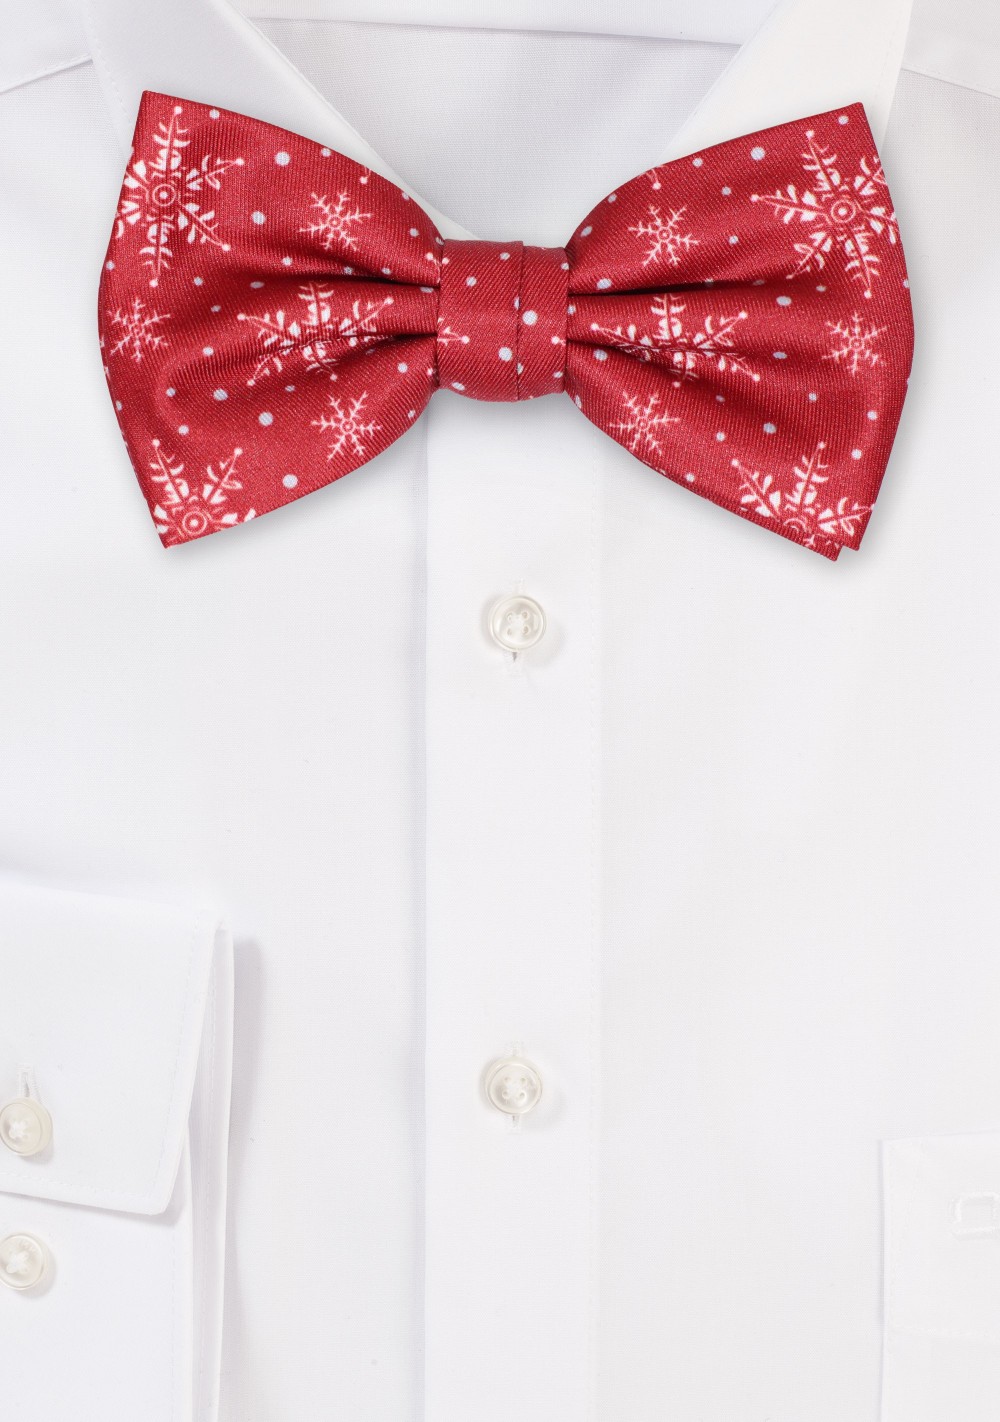 Snowflake Print Bow Tie in Red